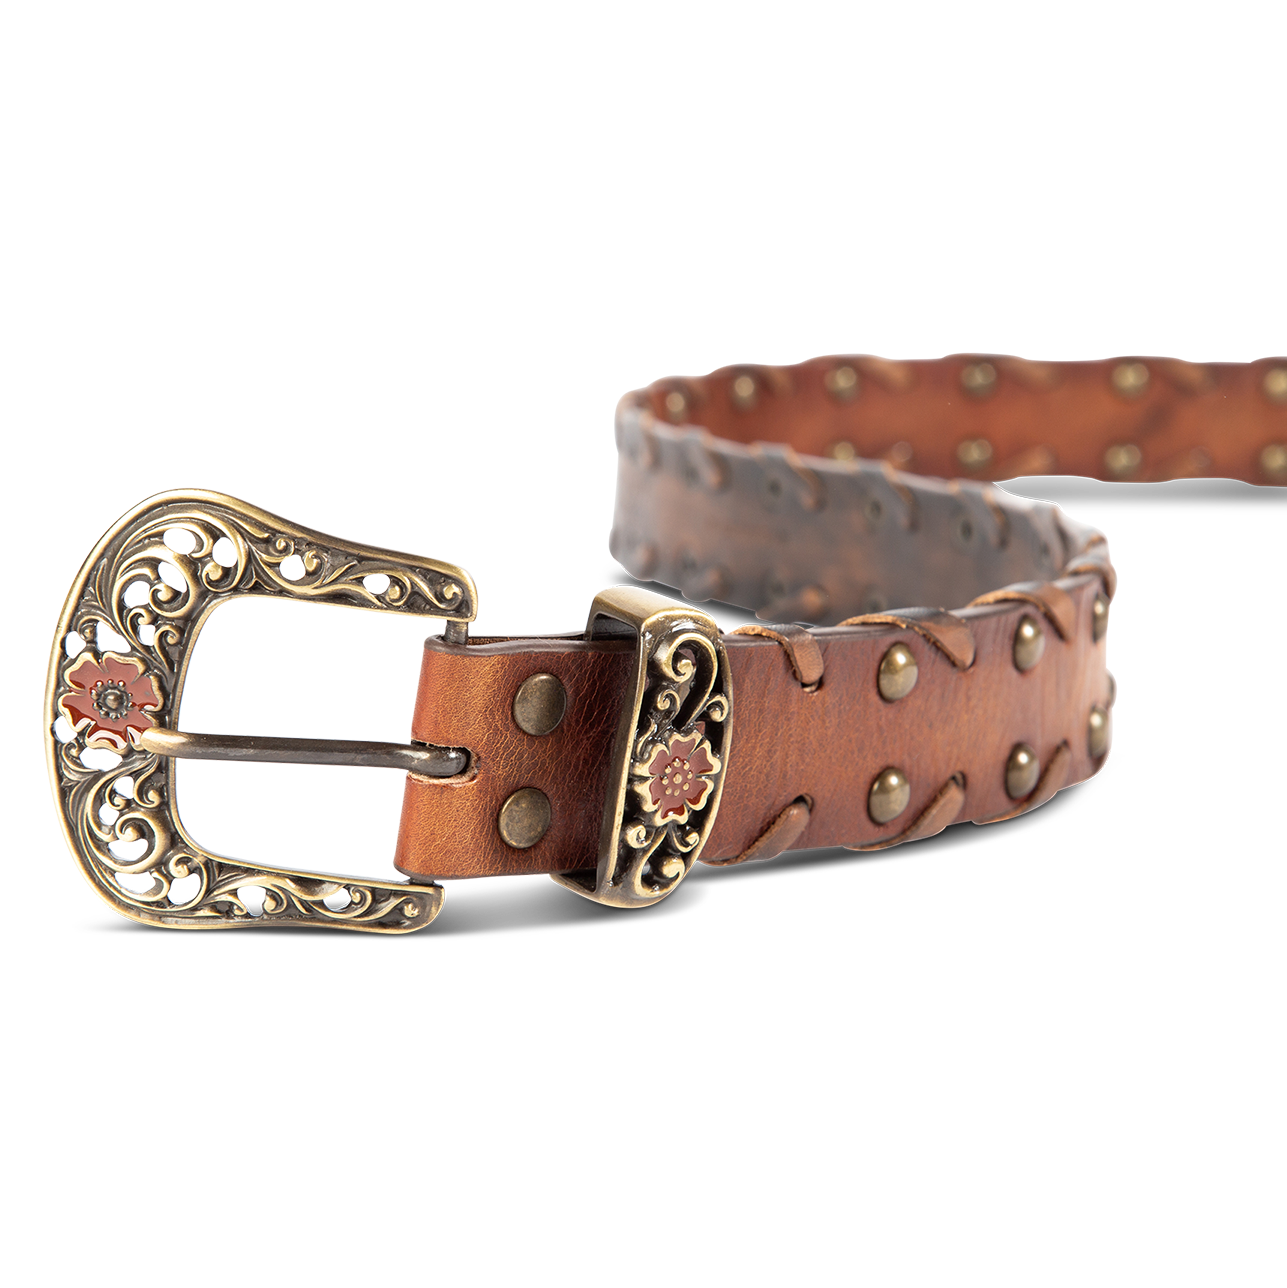  Whip brown front view featuring single buckle closure, embroidered detailing and stud embellishments on FREEBIRD full grain leather belt